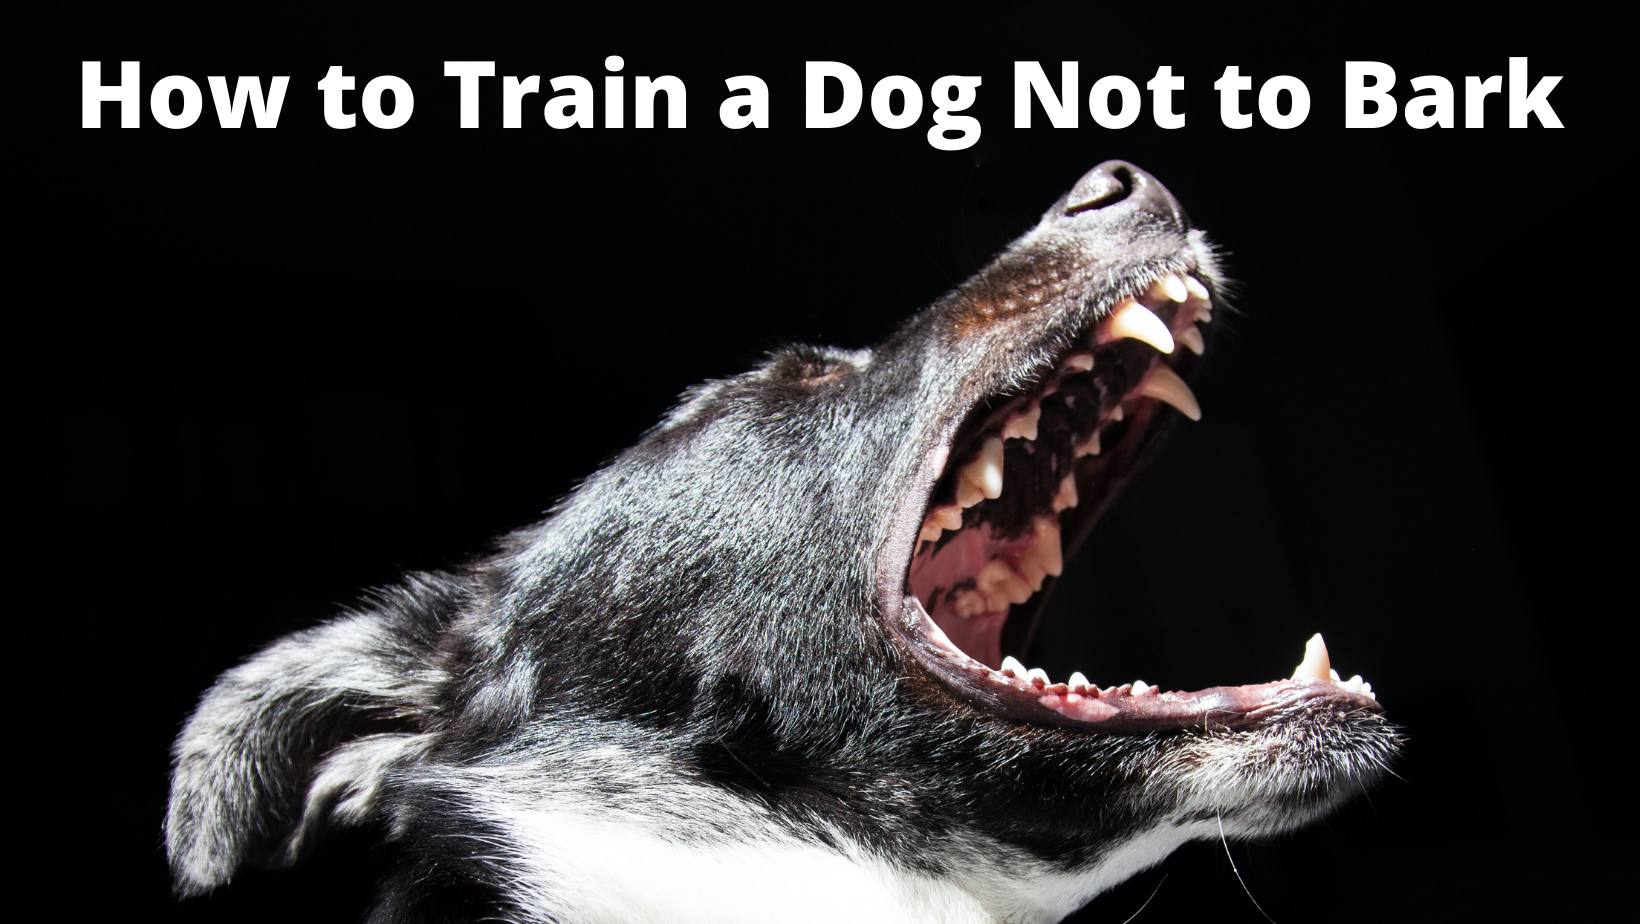 How to Train a Dog Not to Bark